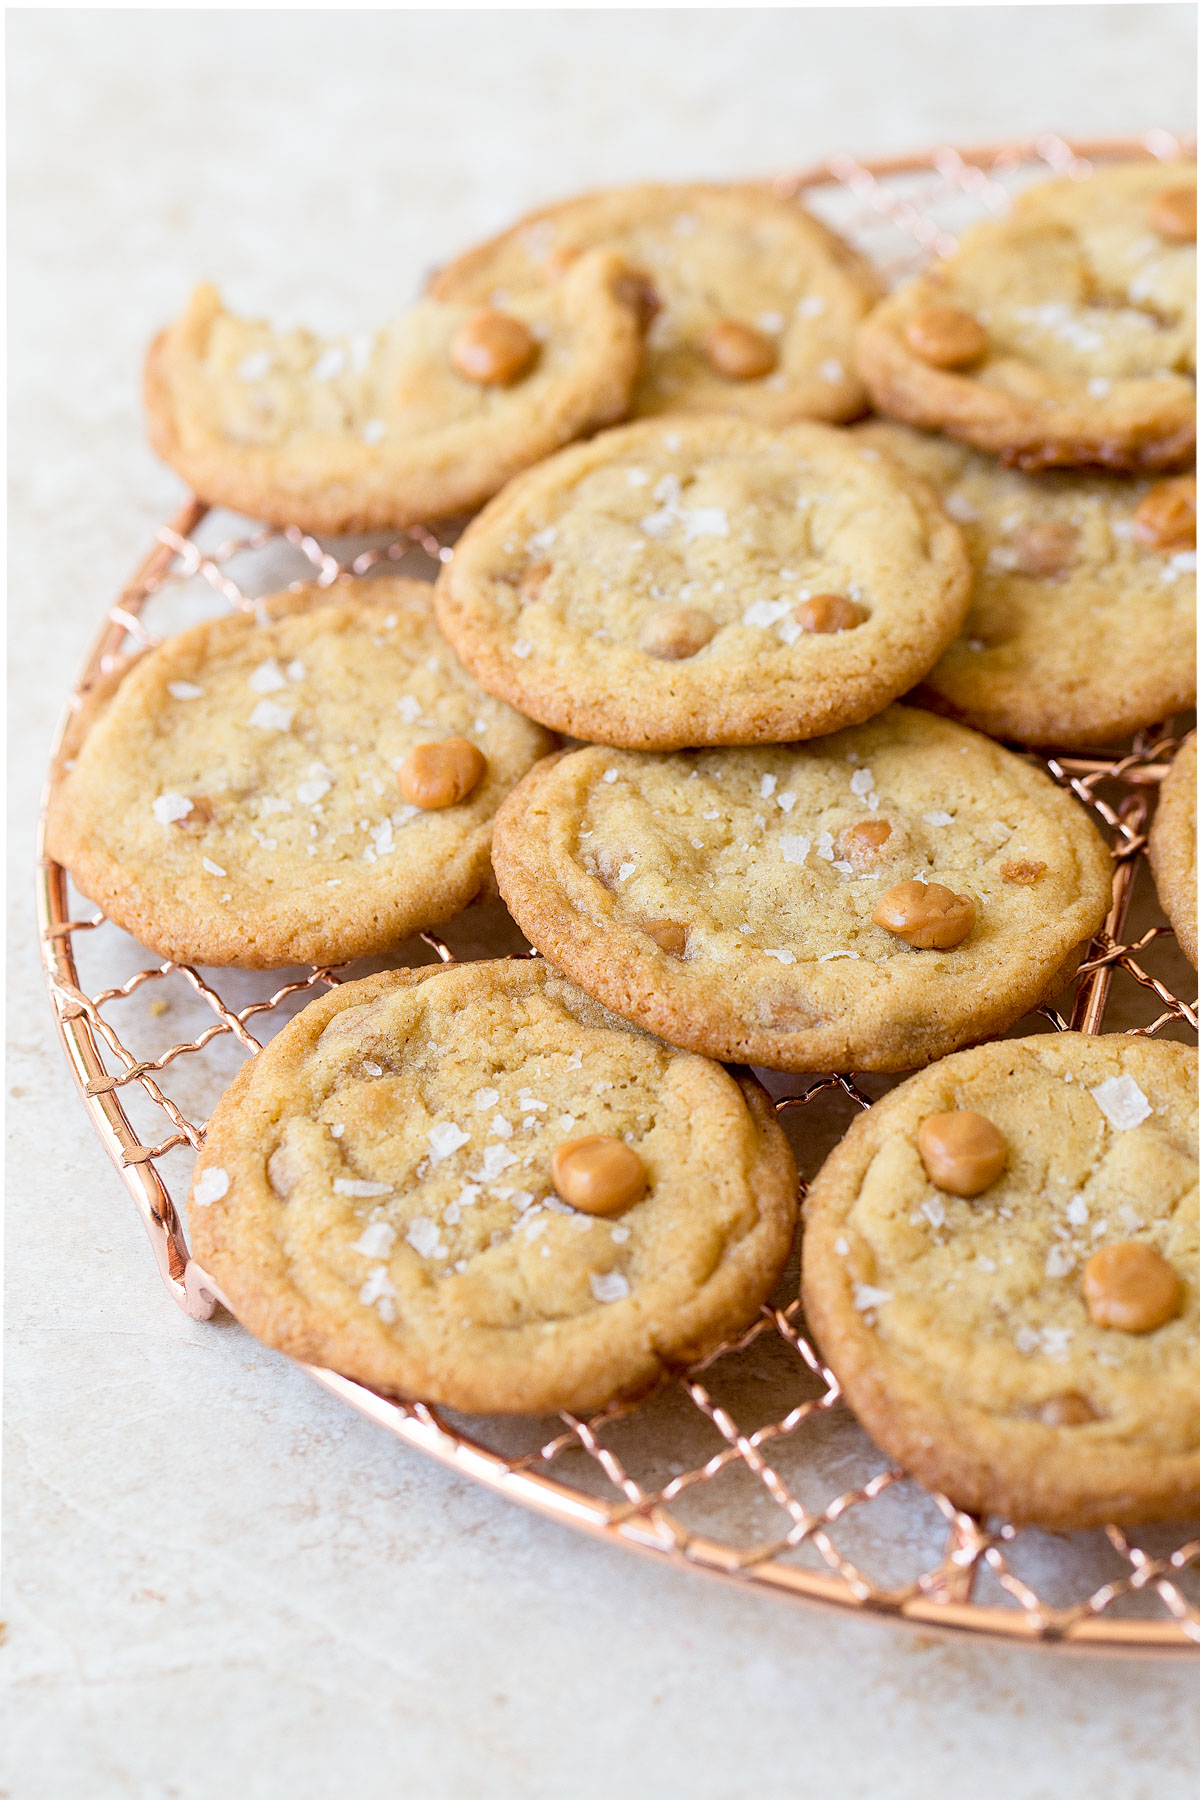 Chewy Salted Caramel Cookies Recipe | Kerrygold UK